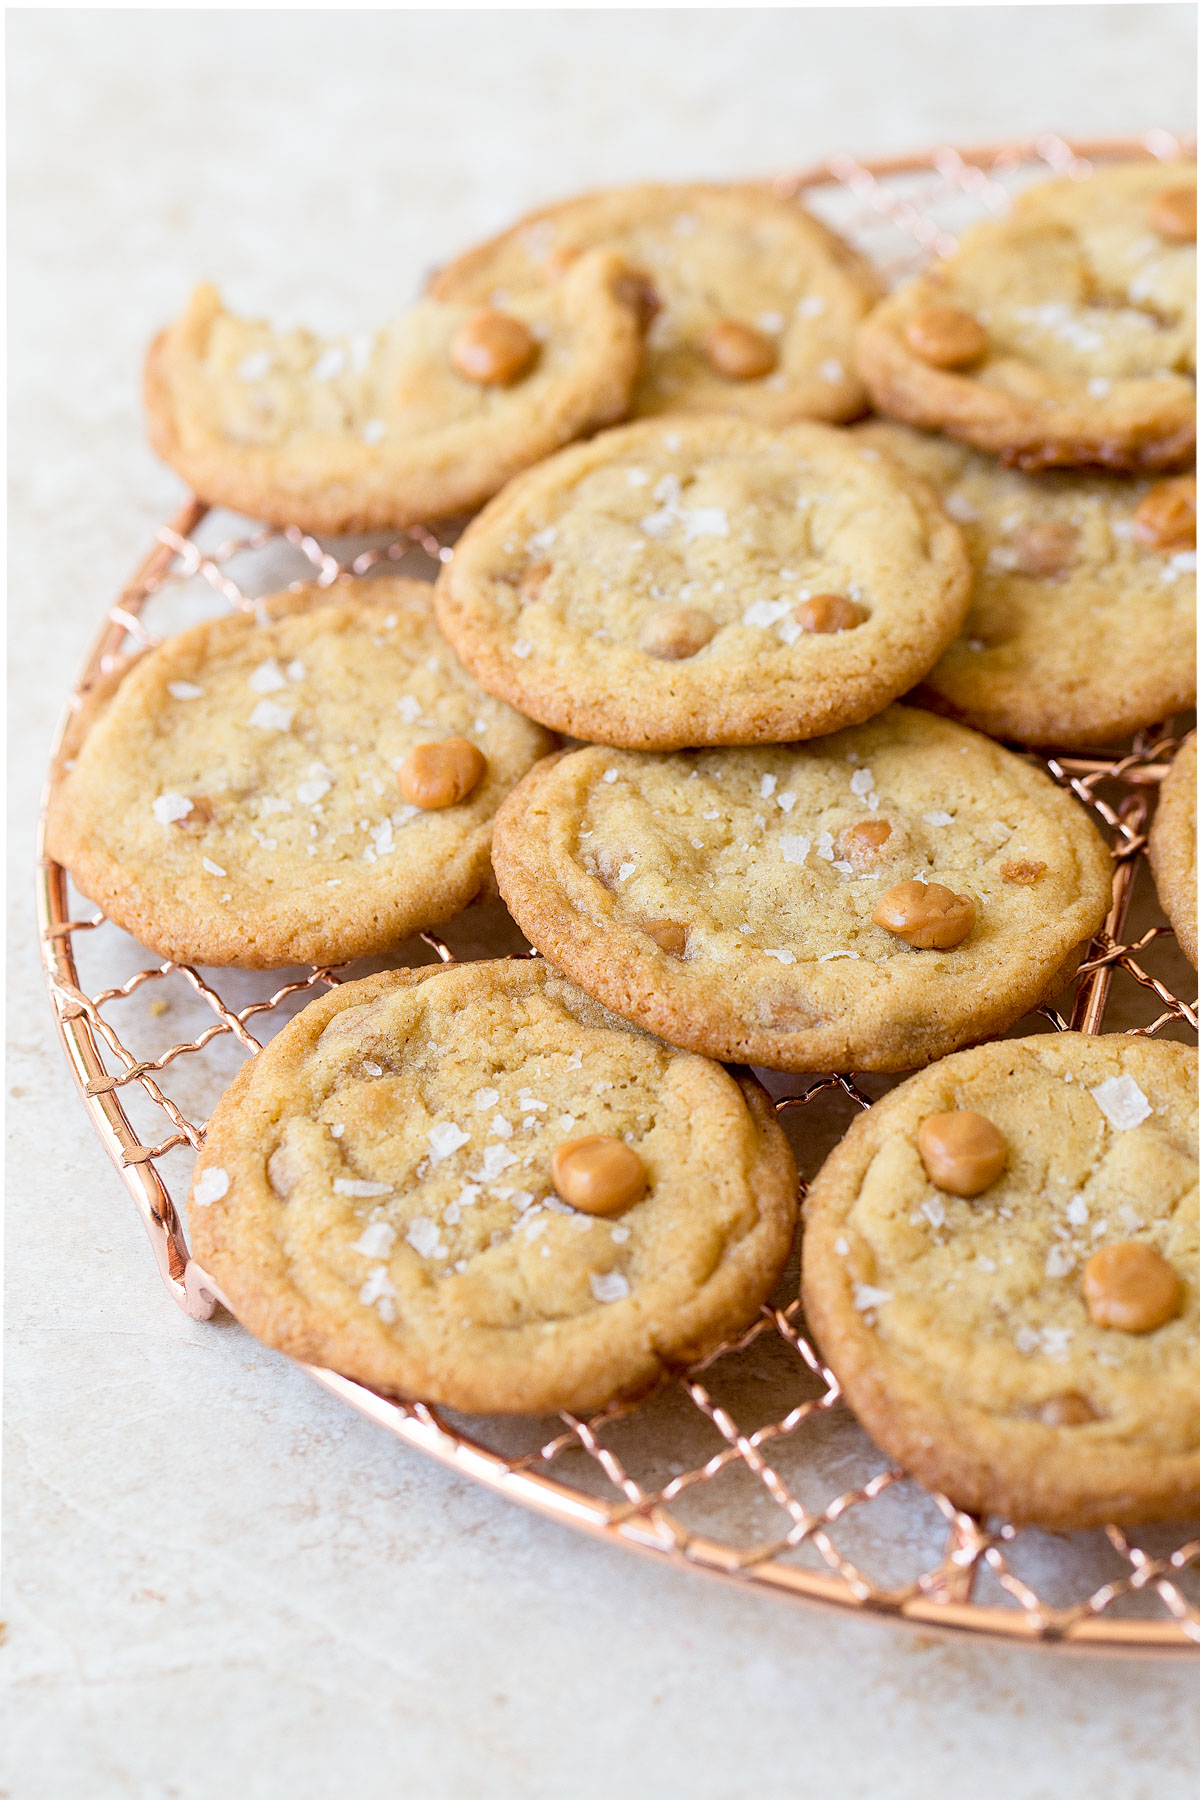 Chewy Salted Caramel Cookies Recipe | Kerrygold UK